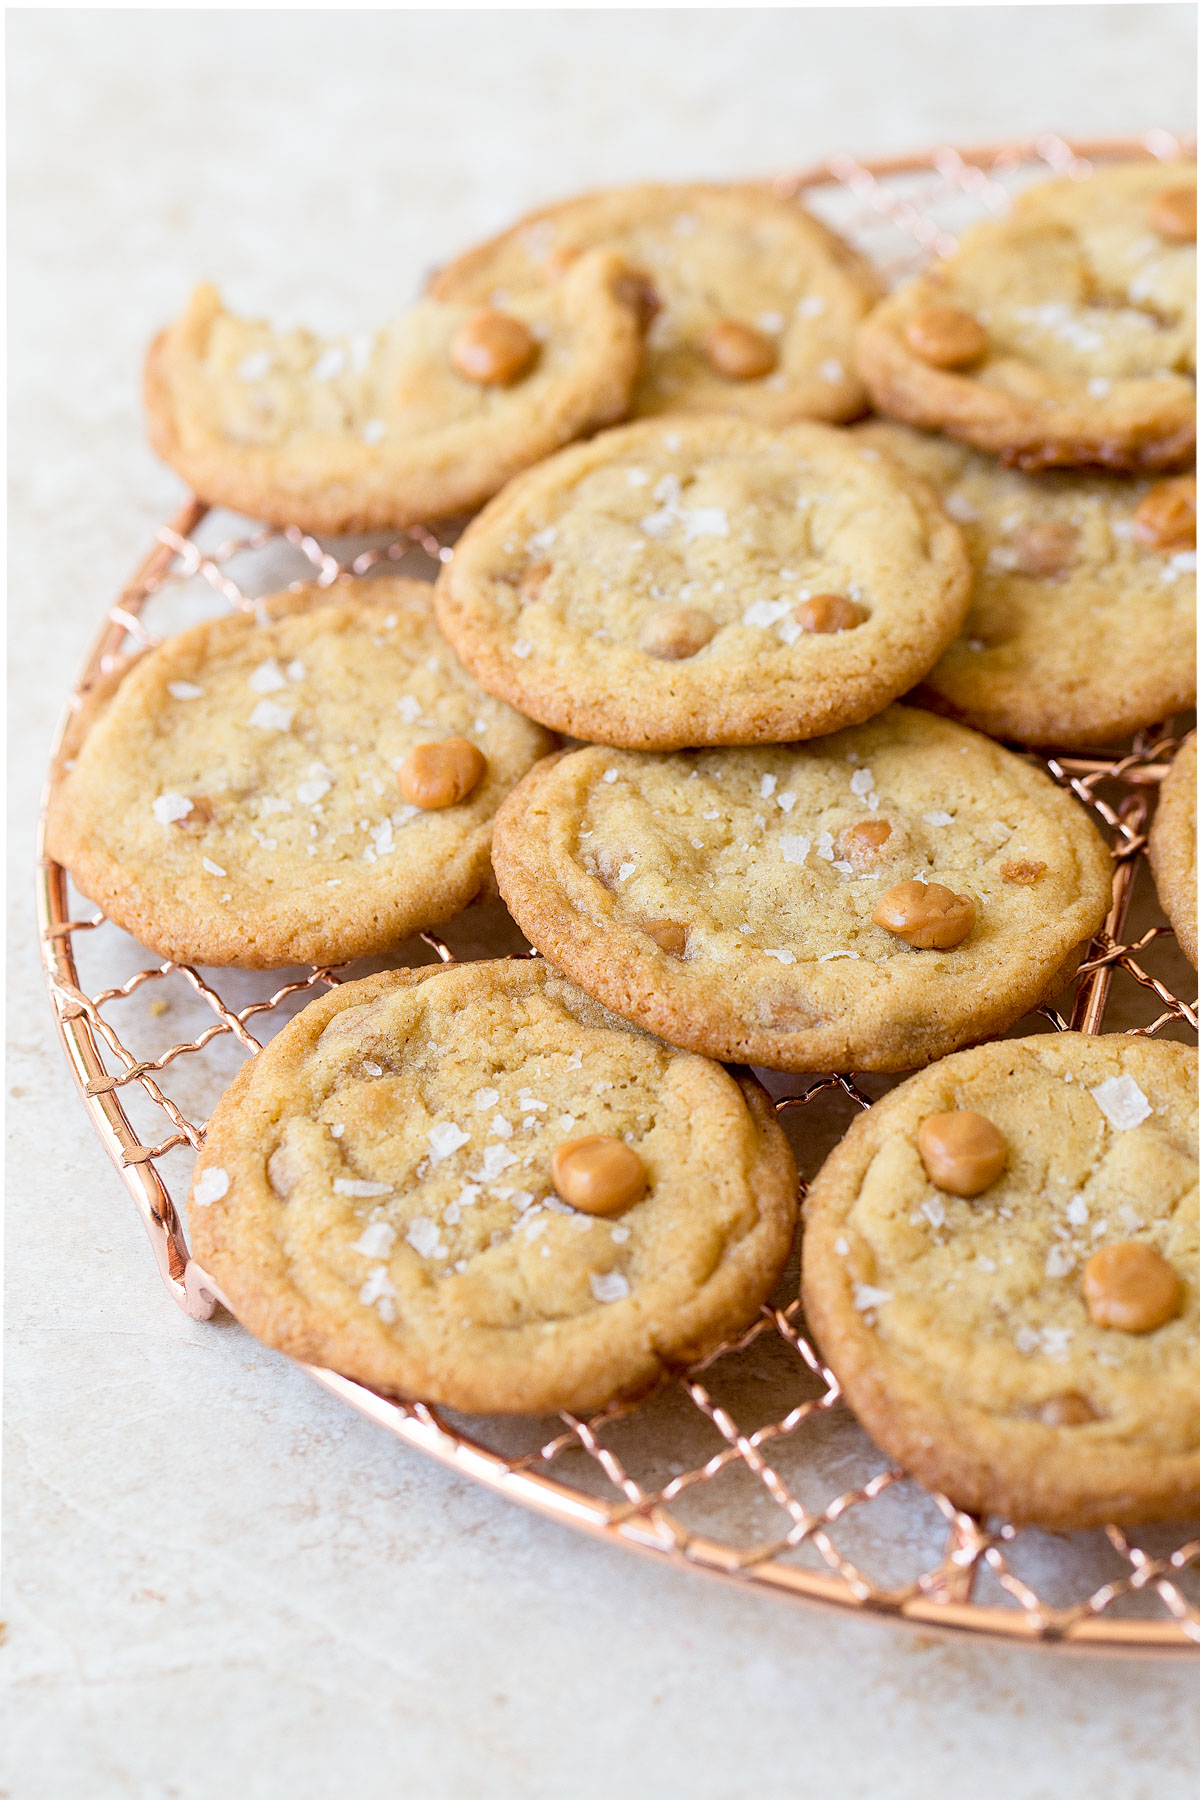 Chewy Salted Caramel Cookies Recipe | Kerrygold UK